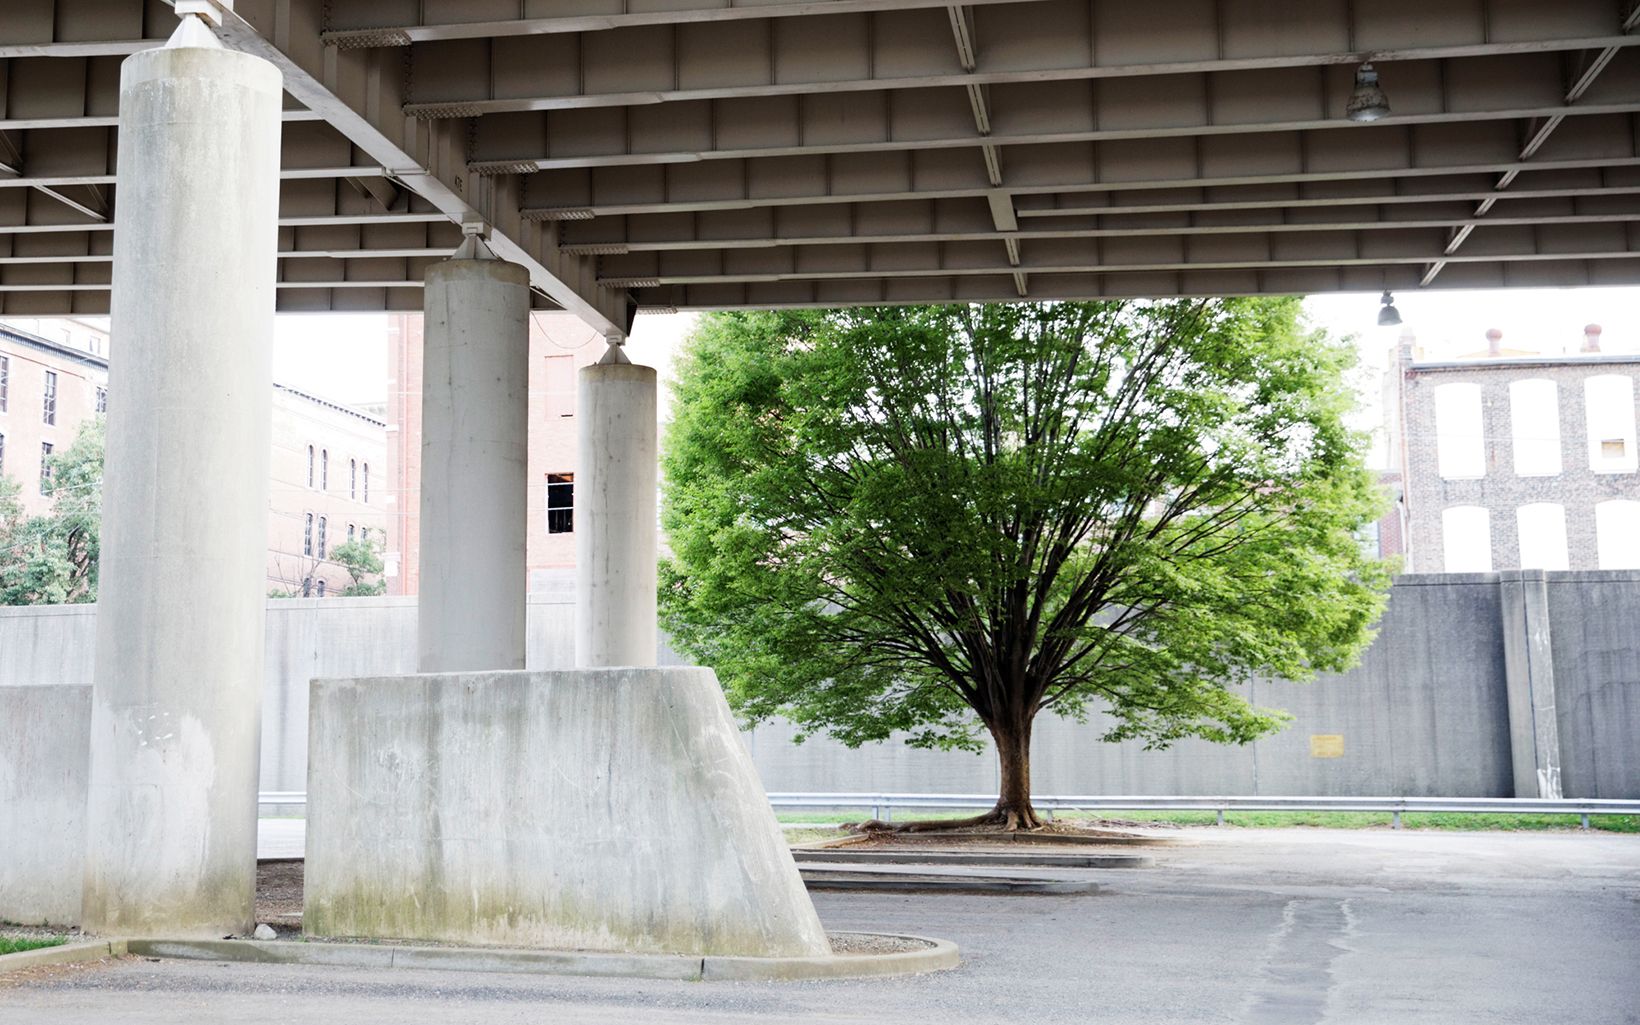 Trees in parking area under Spaghetti Junction, in Louisville, Kentucky. Small pockets of nature, in the right place, can make a big difference for public health.